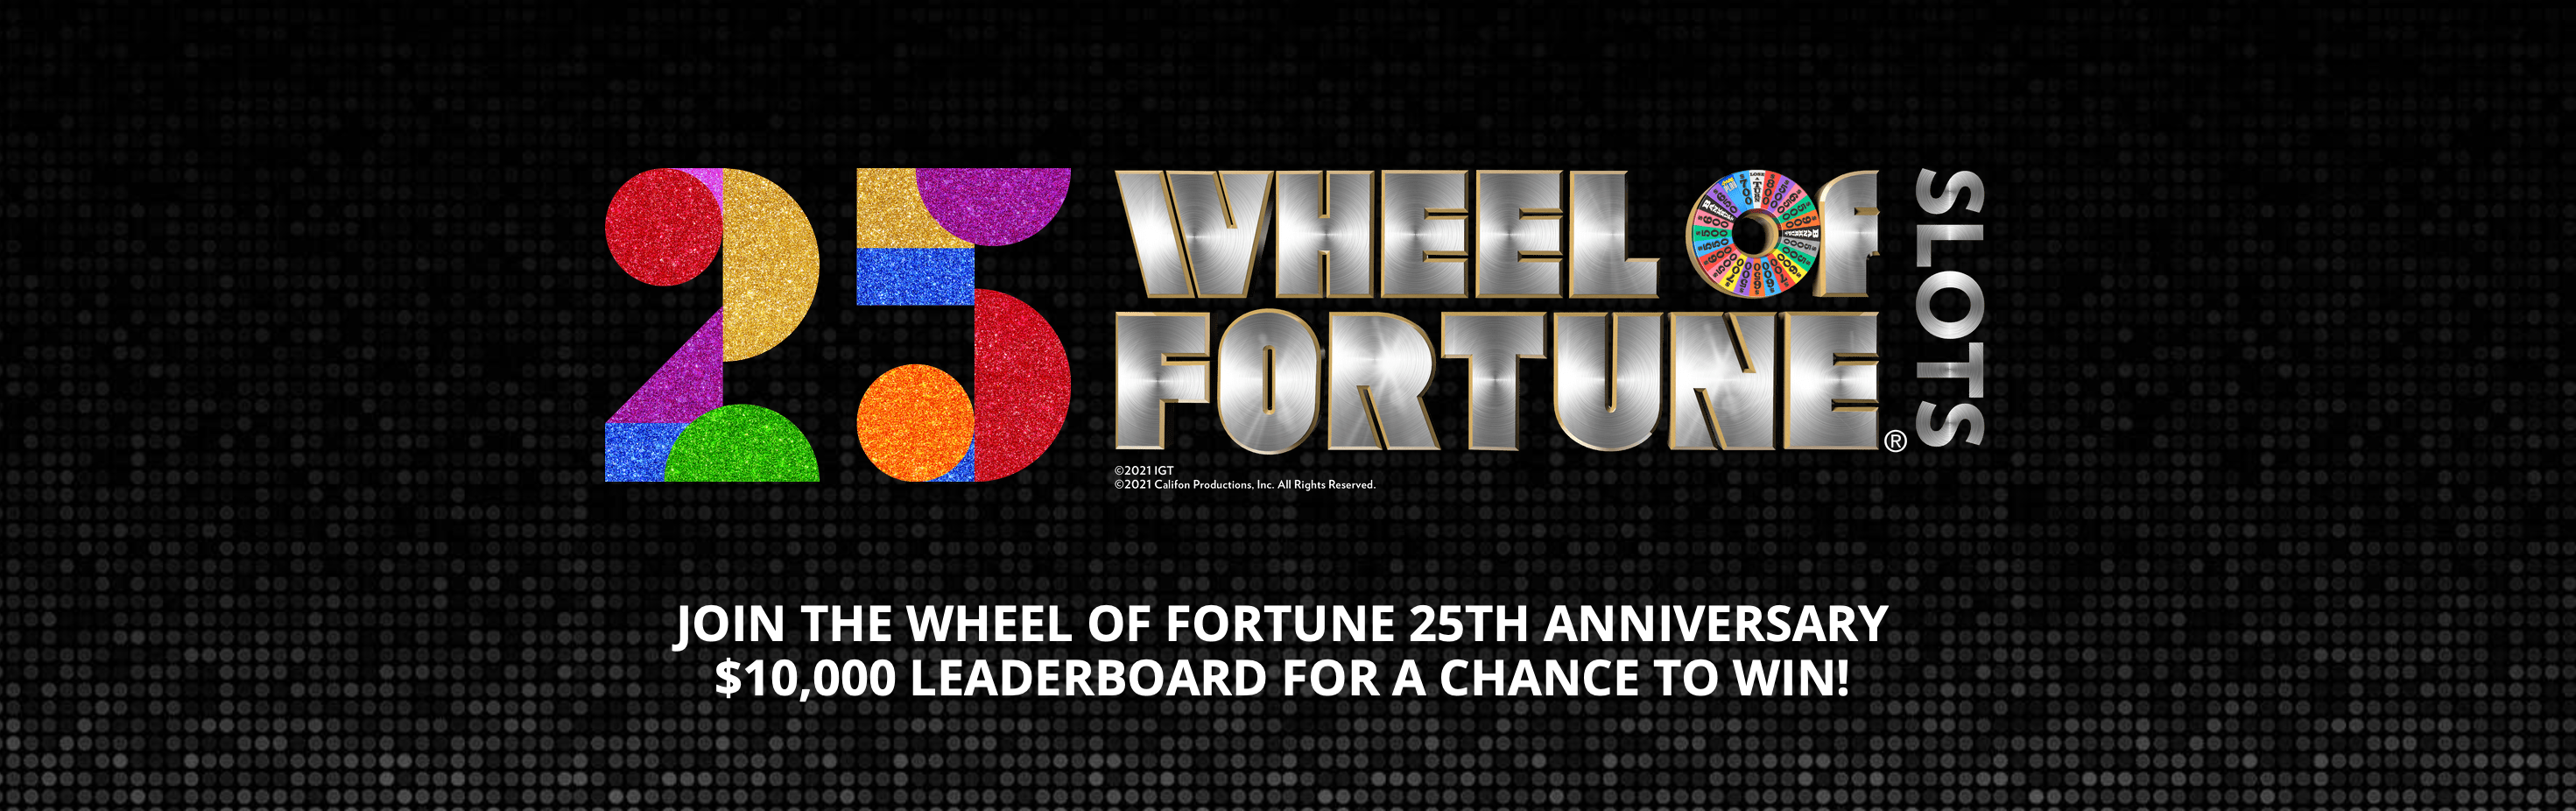 Win your share of 10,000 in the Wheel of Fortune 25th Anniversary